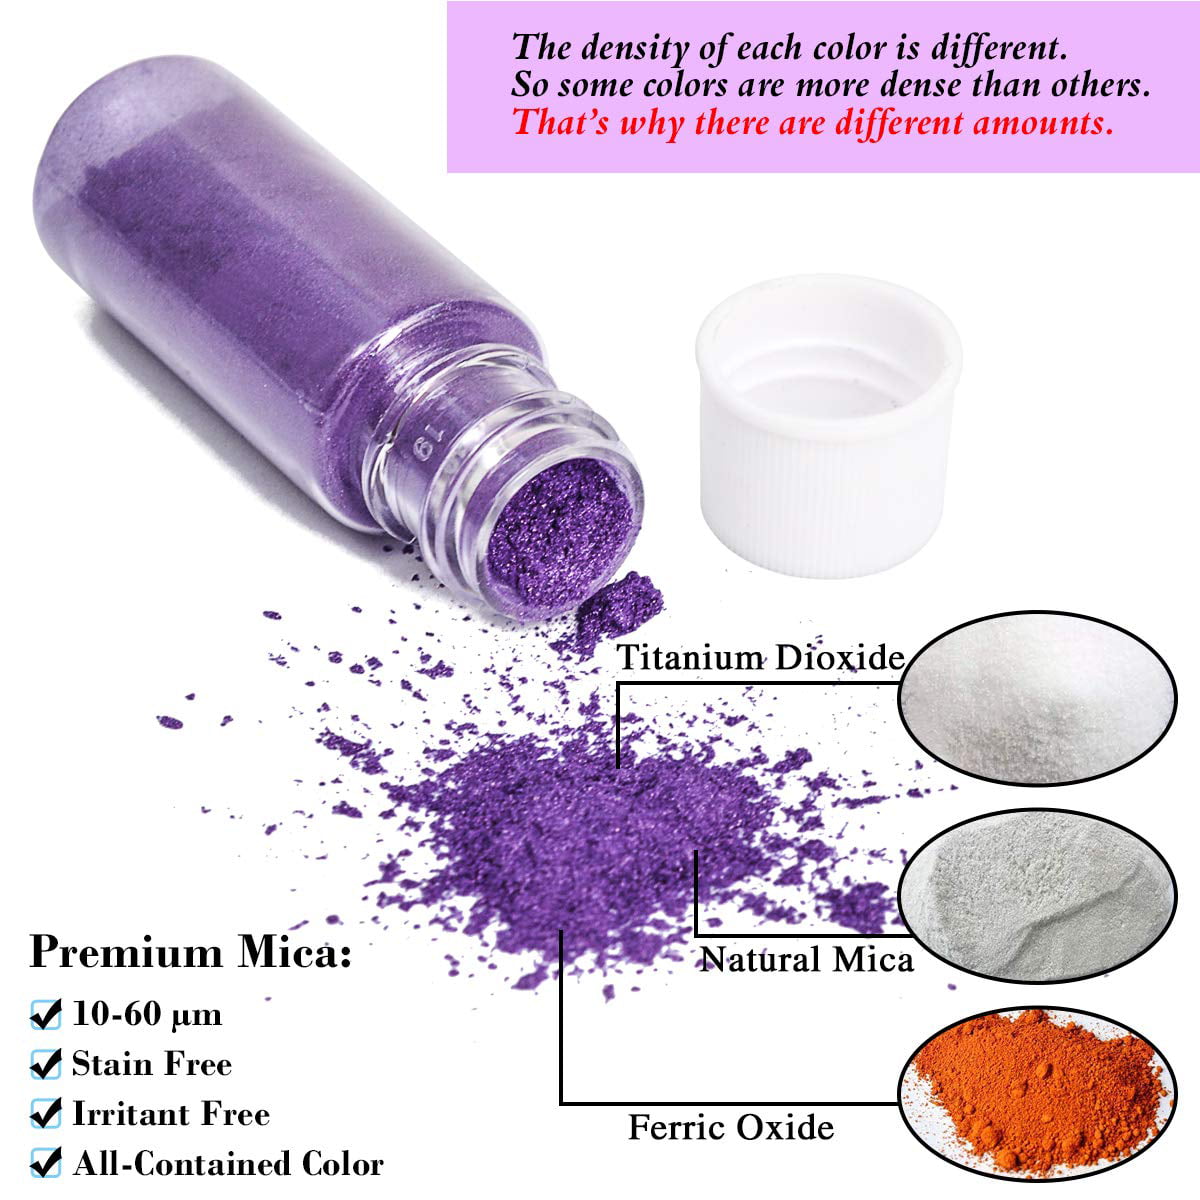 Lavender Purple Mica Powder, SEISSO Mica Powder for Epoxy Resin 1.76 oz  /50g, Powdered Pigment for Soap Making, Candle Making, Slime, Nail Polish